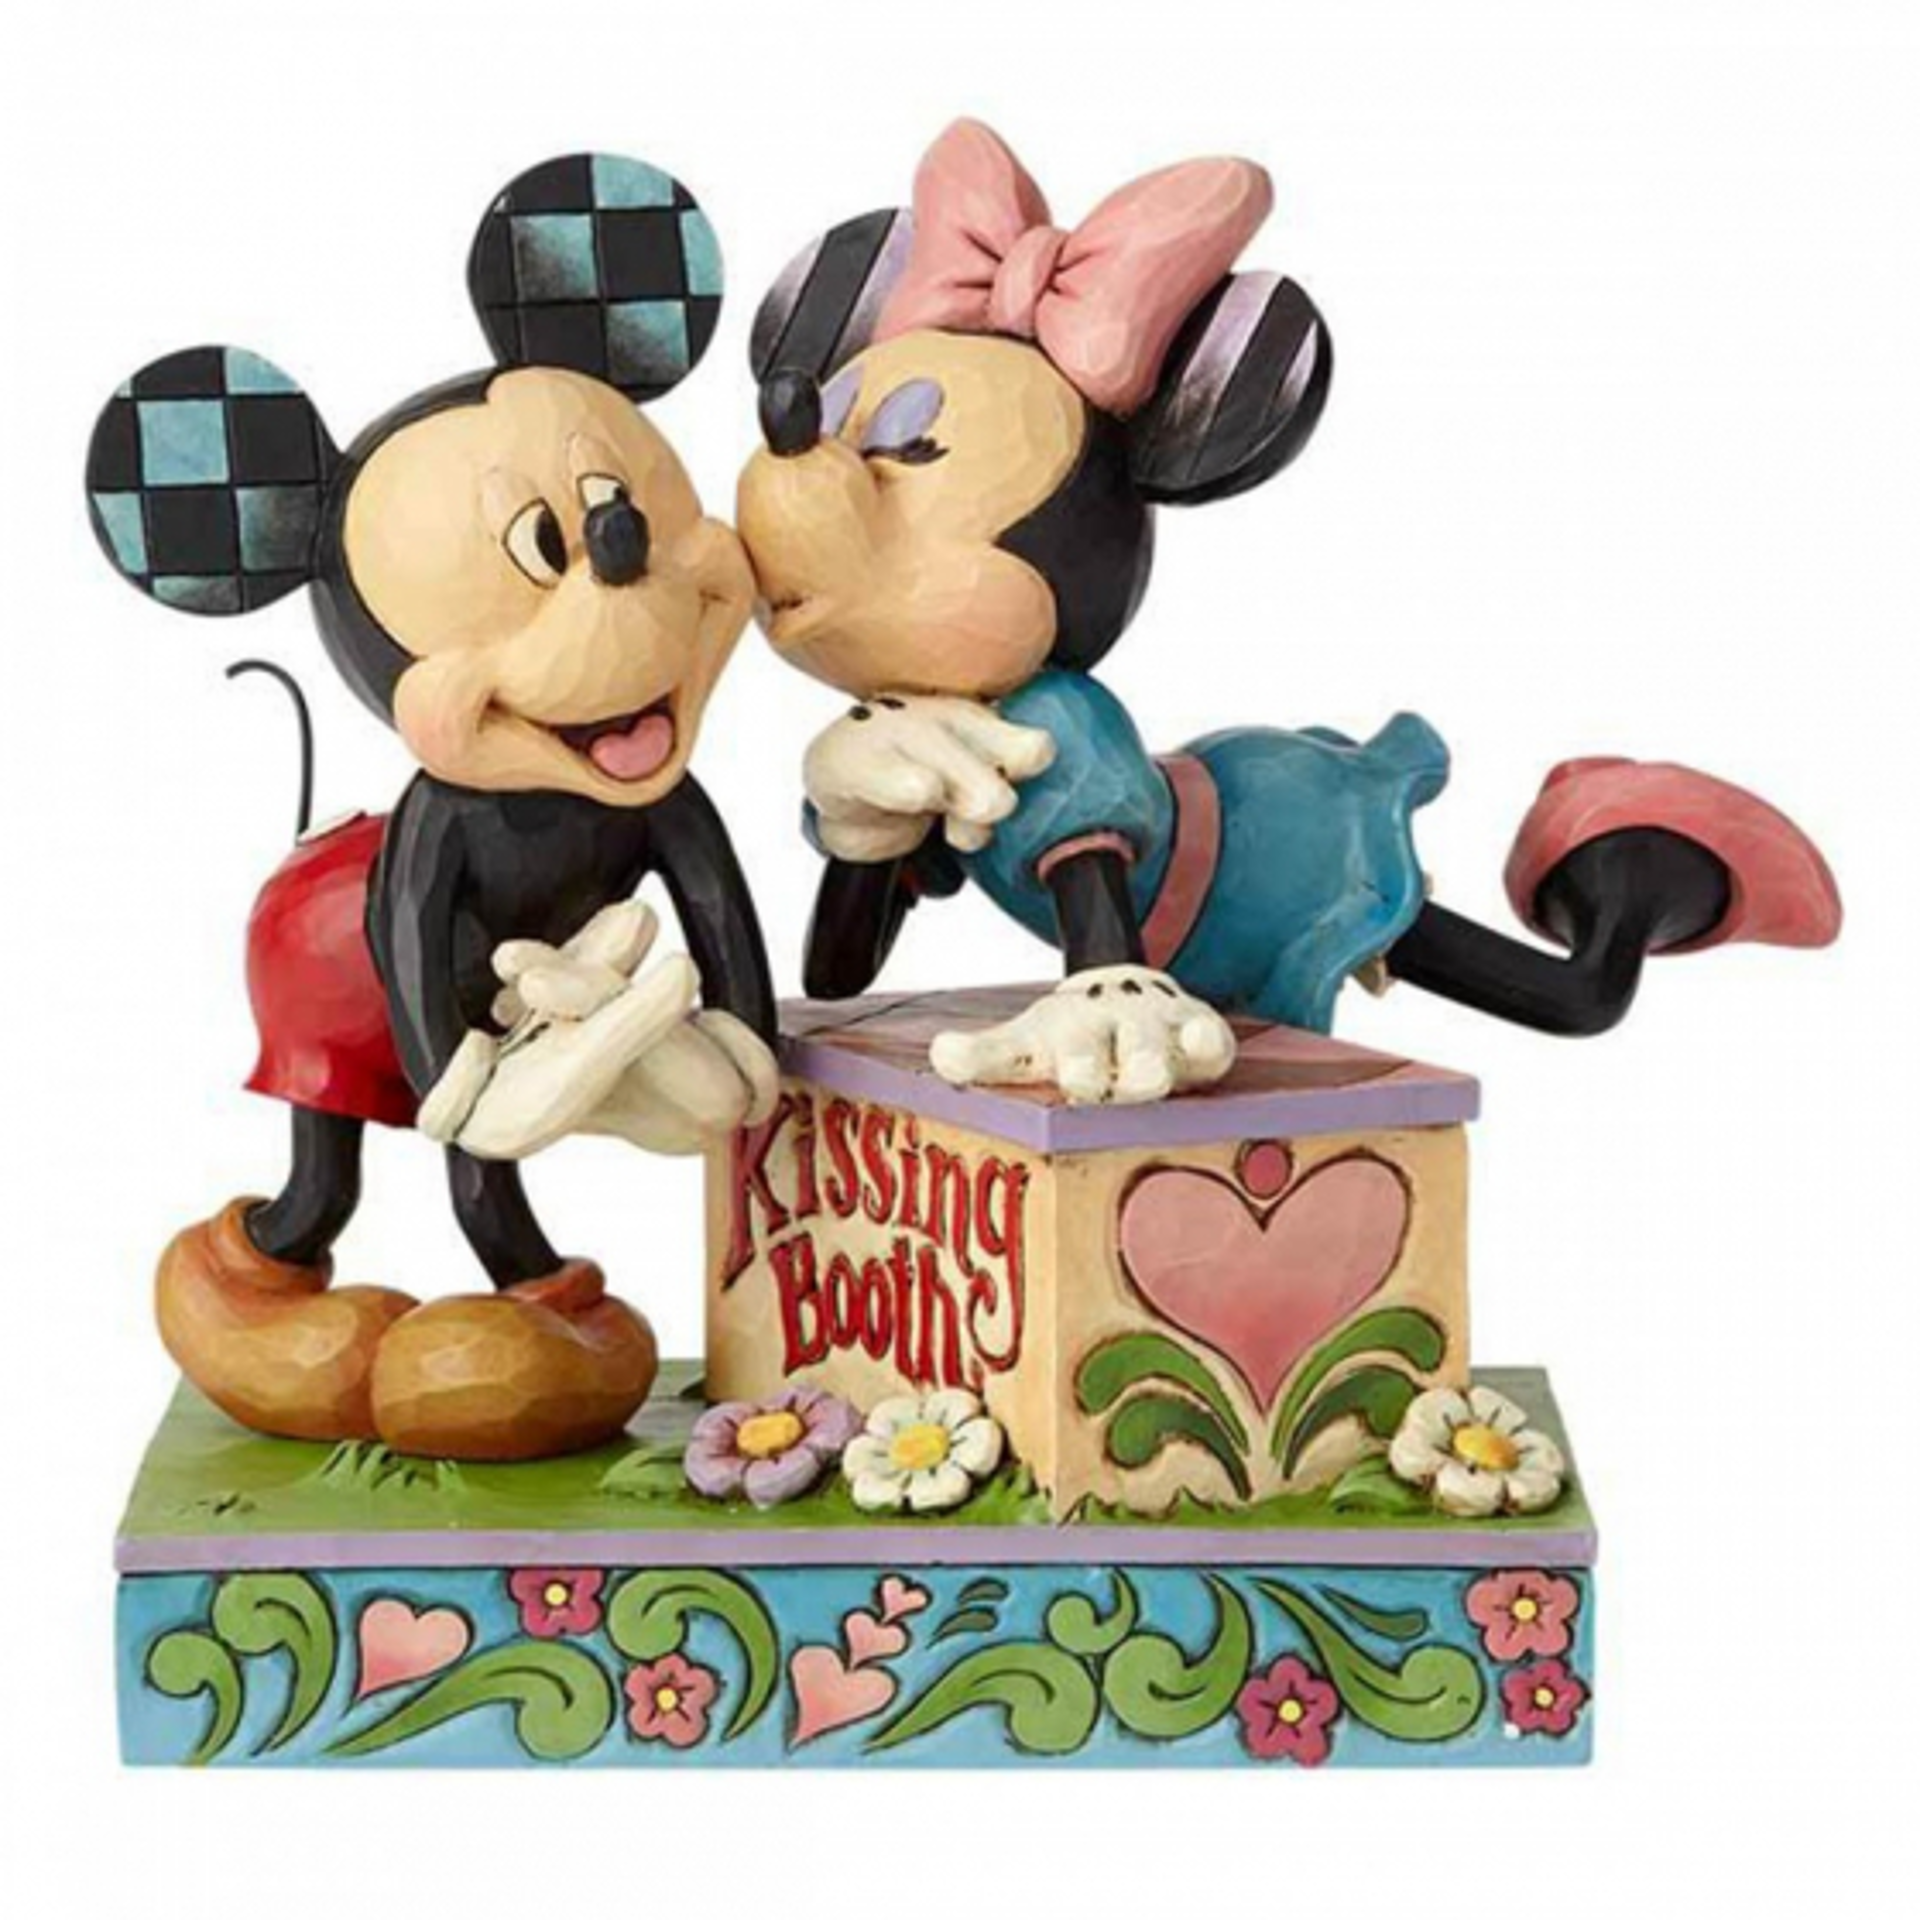 Enesco - Disney Kissing Booth (Mickey Mouse & Minnie Mouse Figur